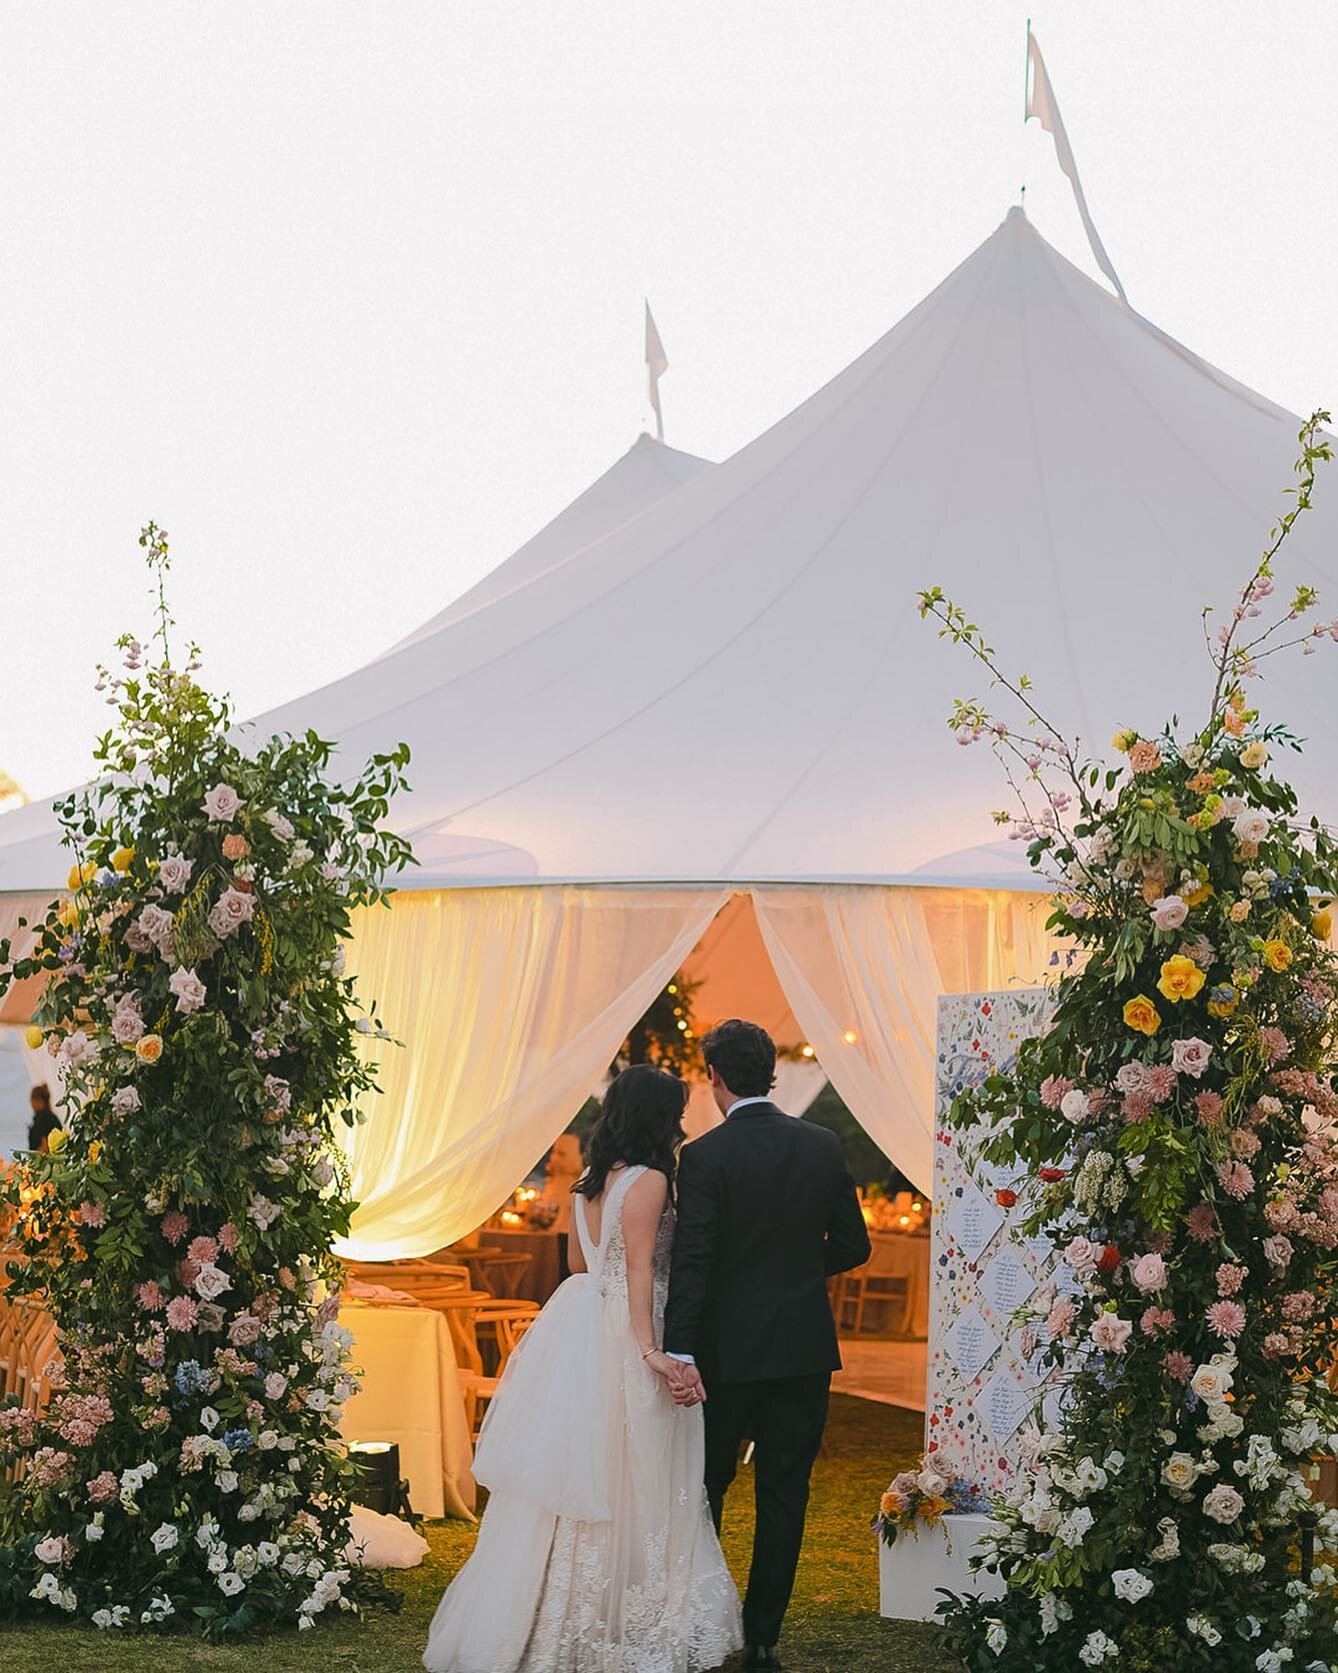 Sperry tents, effortlessly gorgeous and more than a rain plan in this gorgeous design!  Also, we always encourage the couple to sneak a peek before we invite guests into the space!

Amazing team
LBJ Wildflower Center
Photographer @graciebyrdjones 
Fl